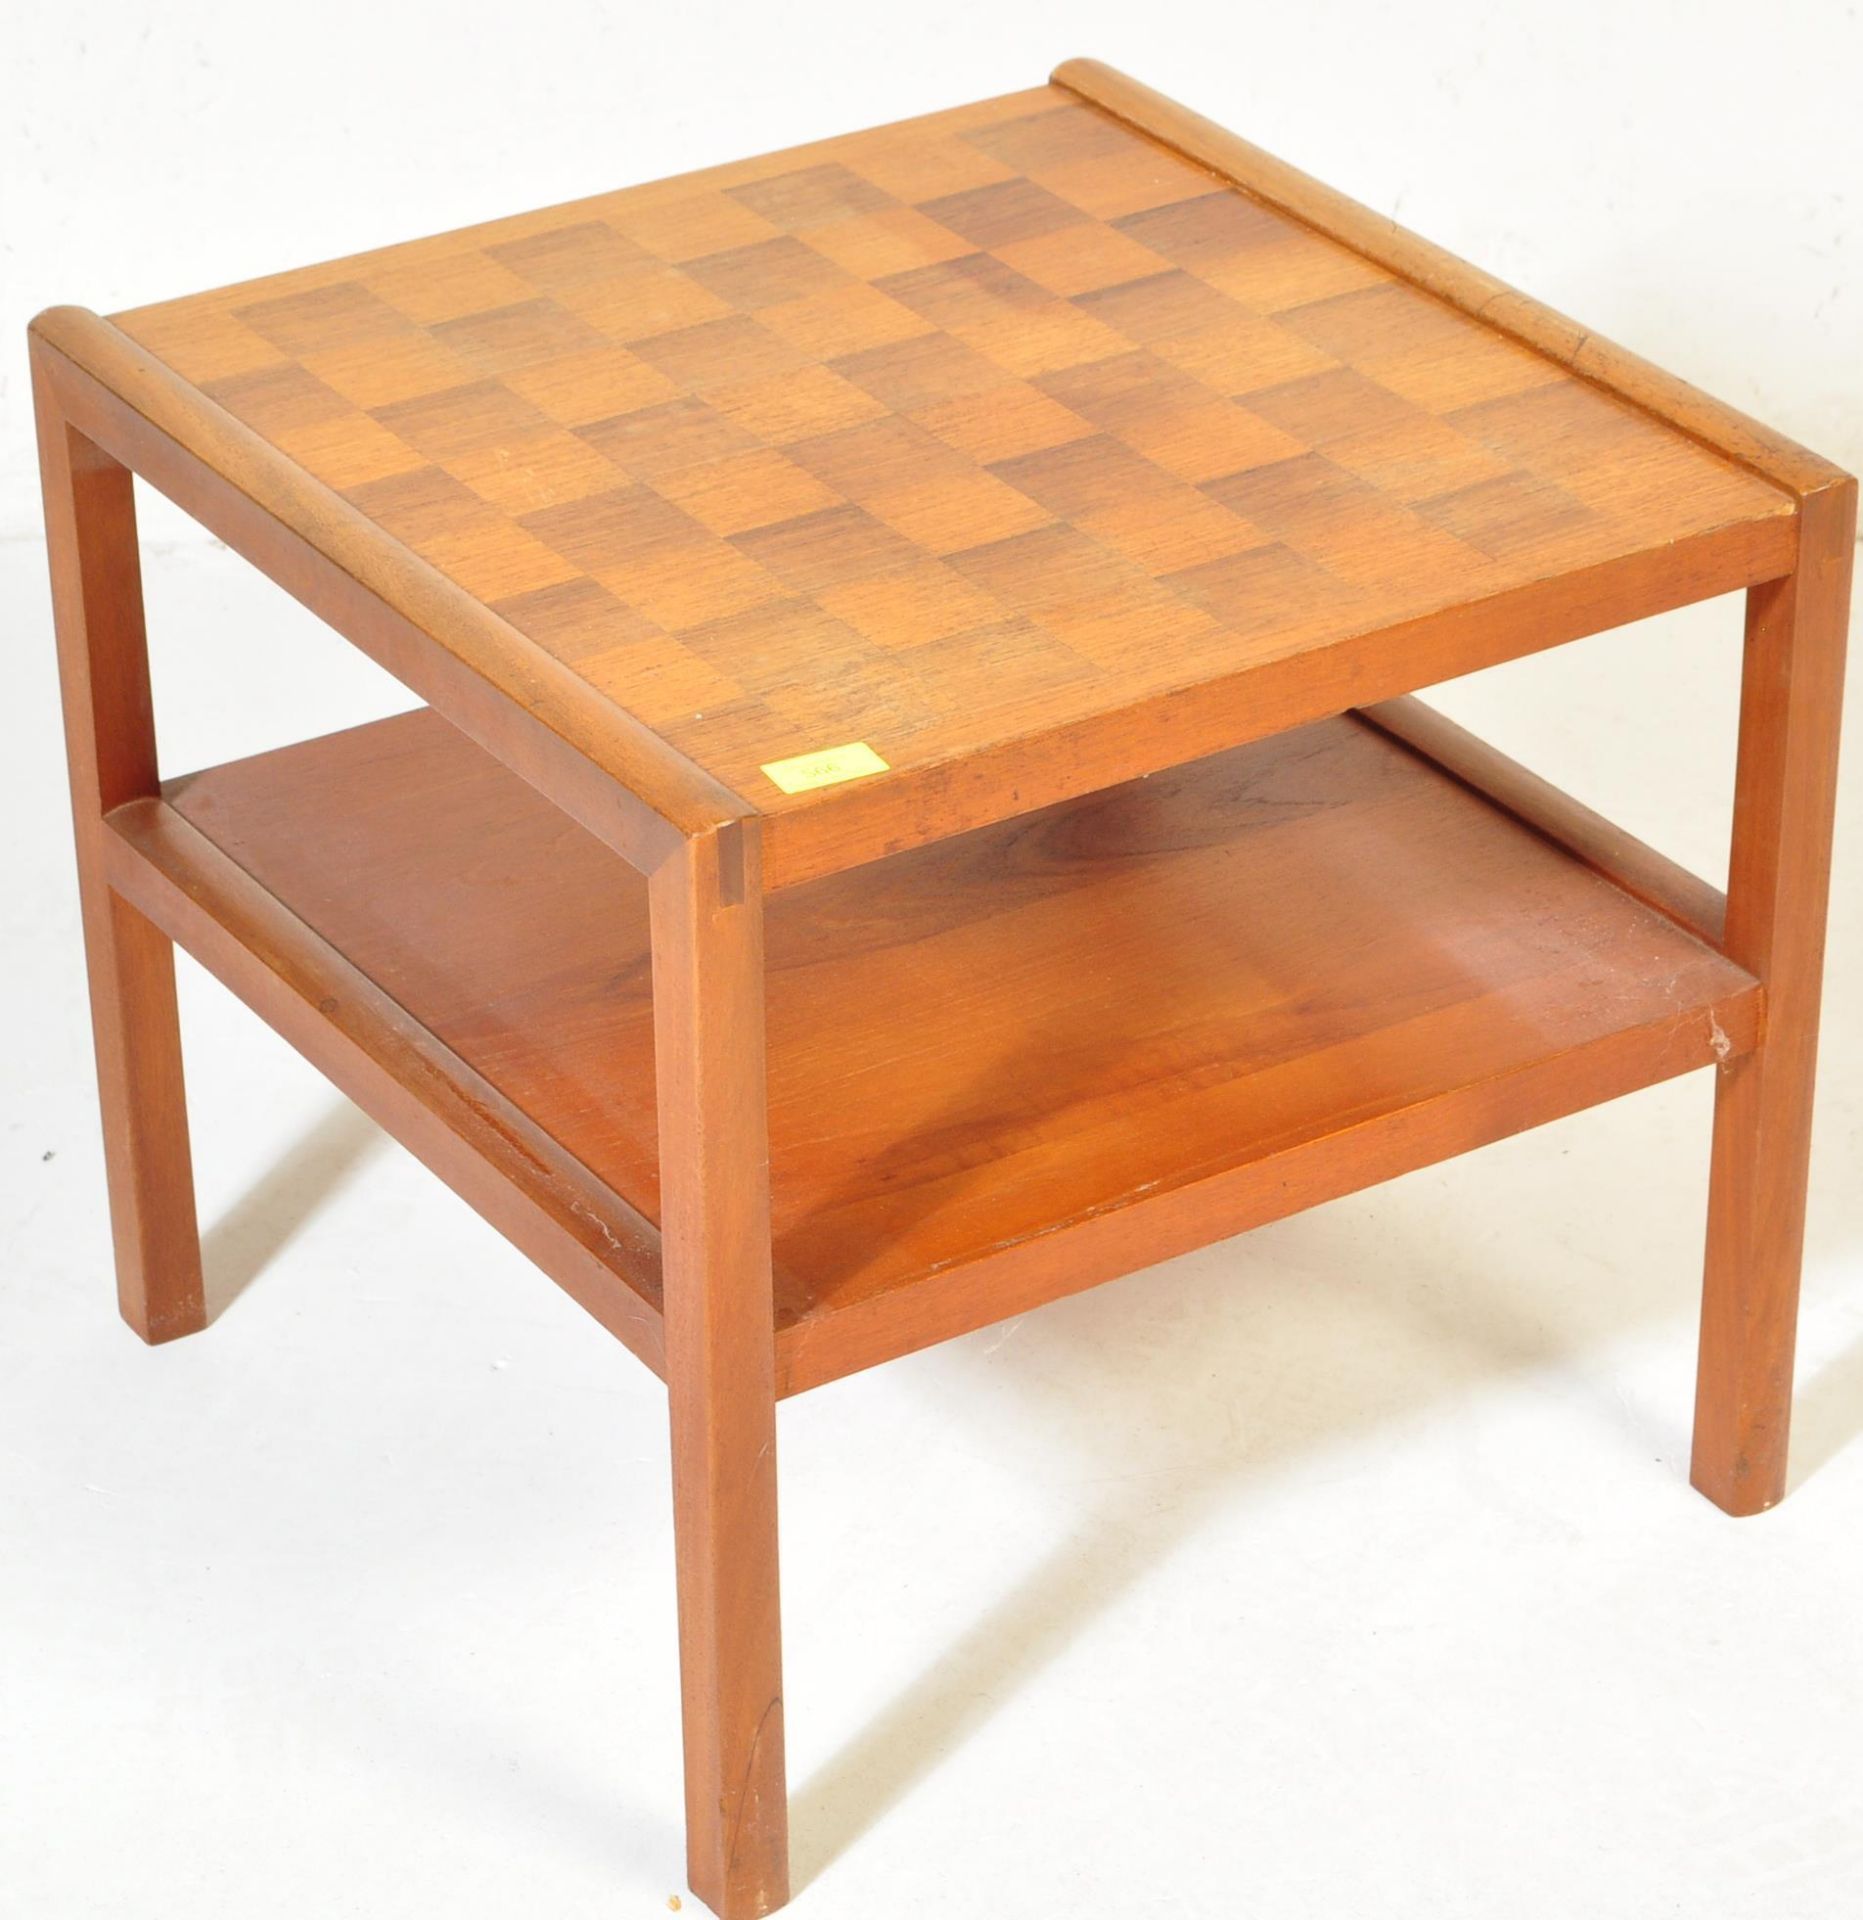 RETRO VINTAGE TEAK CHESS BOARD OCCASIONAL TABLE - Image 2 of 4